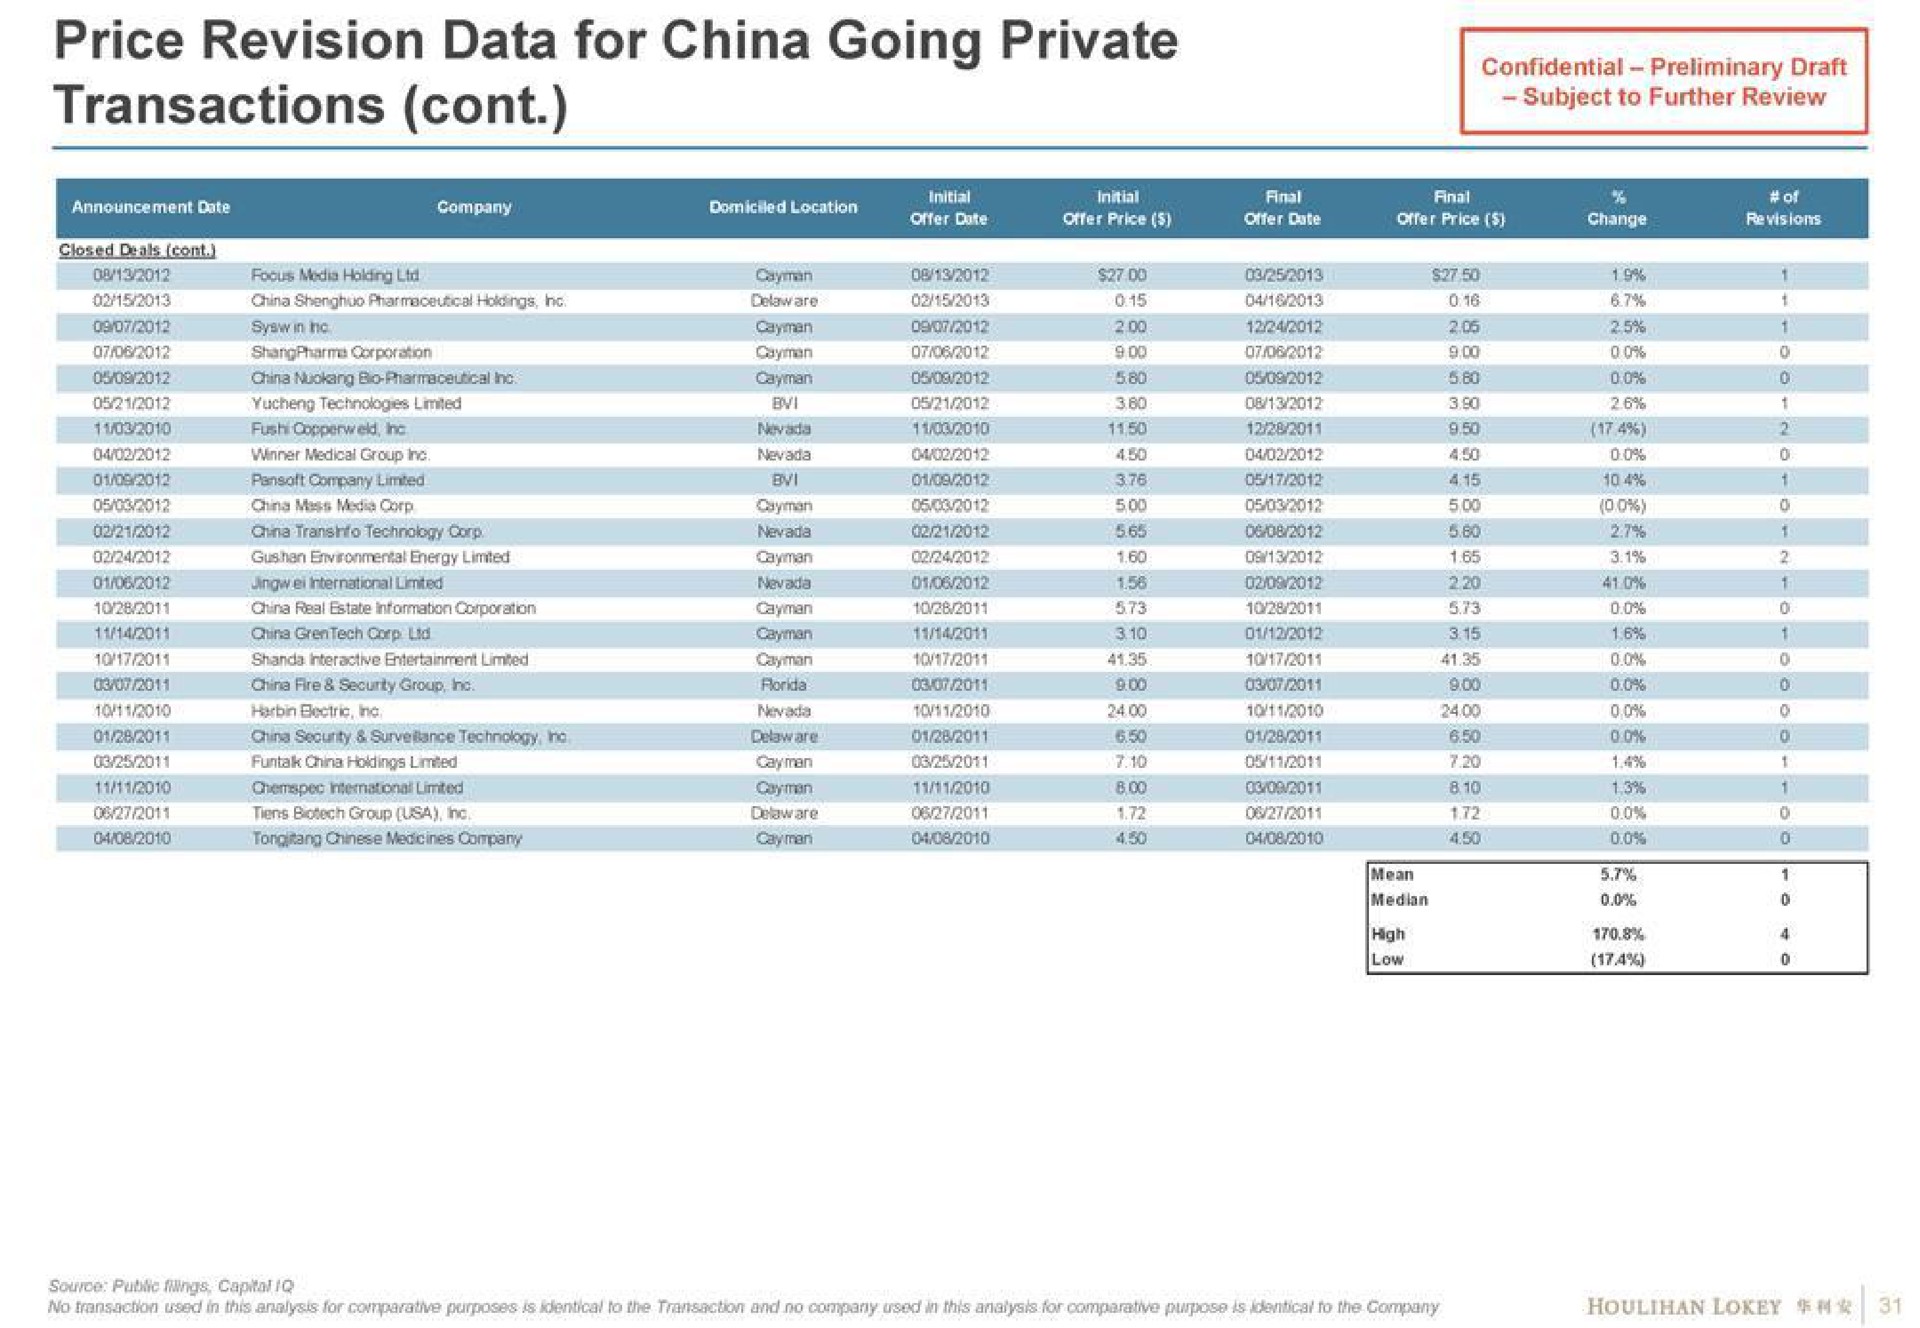 price revision data for china going private | Houlihan Lokey